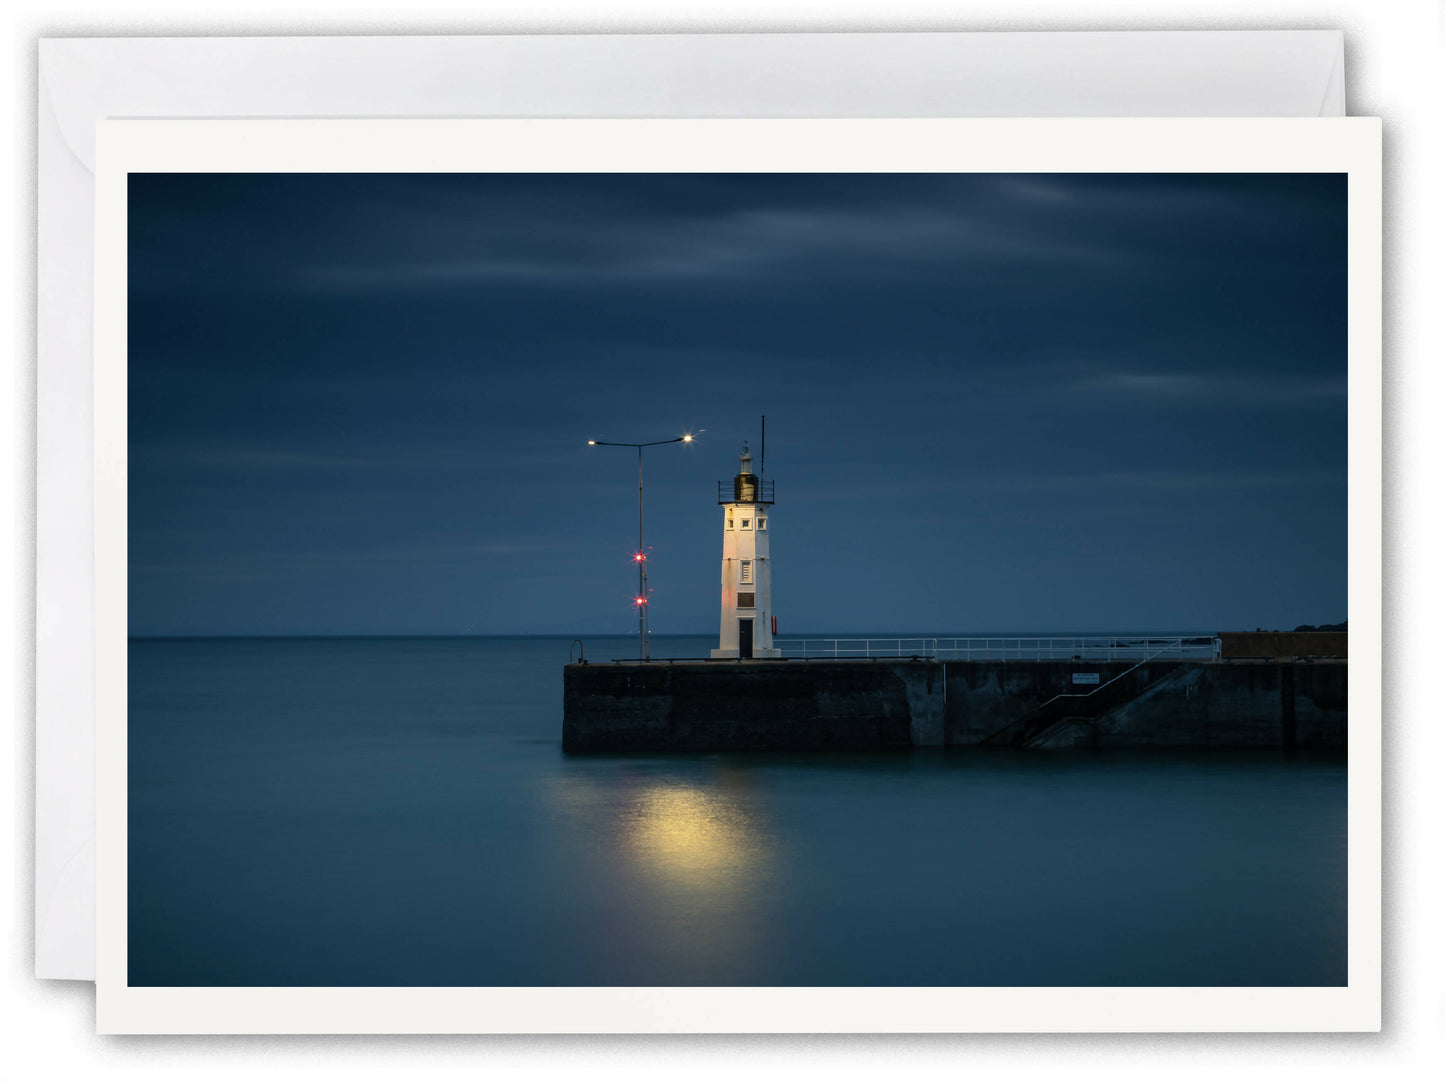 Chalmers Lighthouse, Anstruther - Scotland Greeting Card - Blank Inside